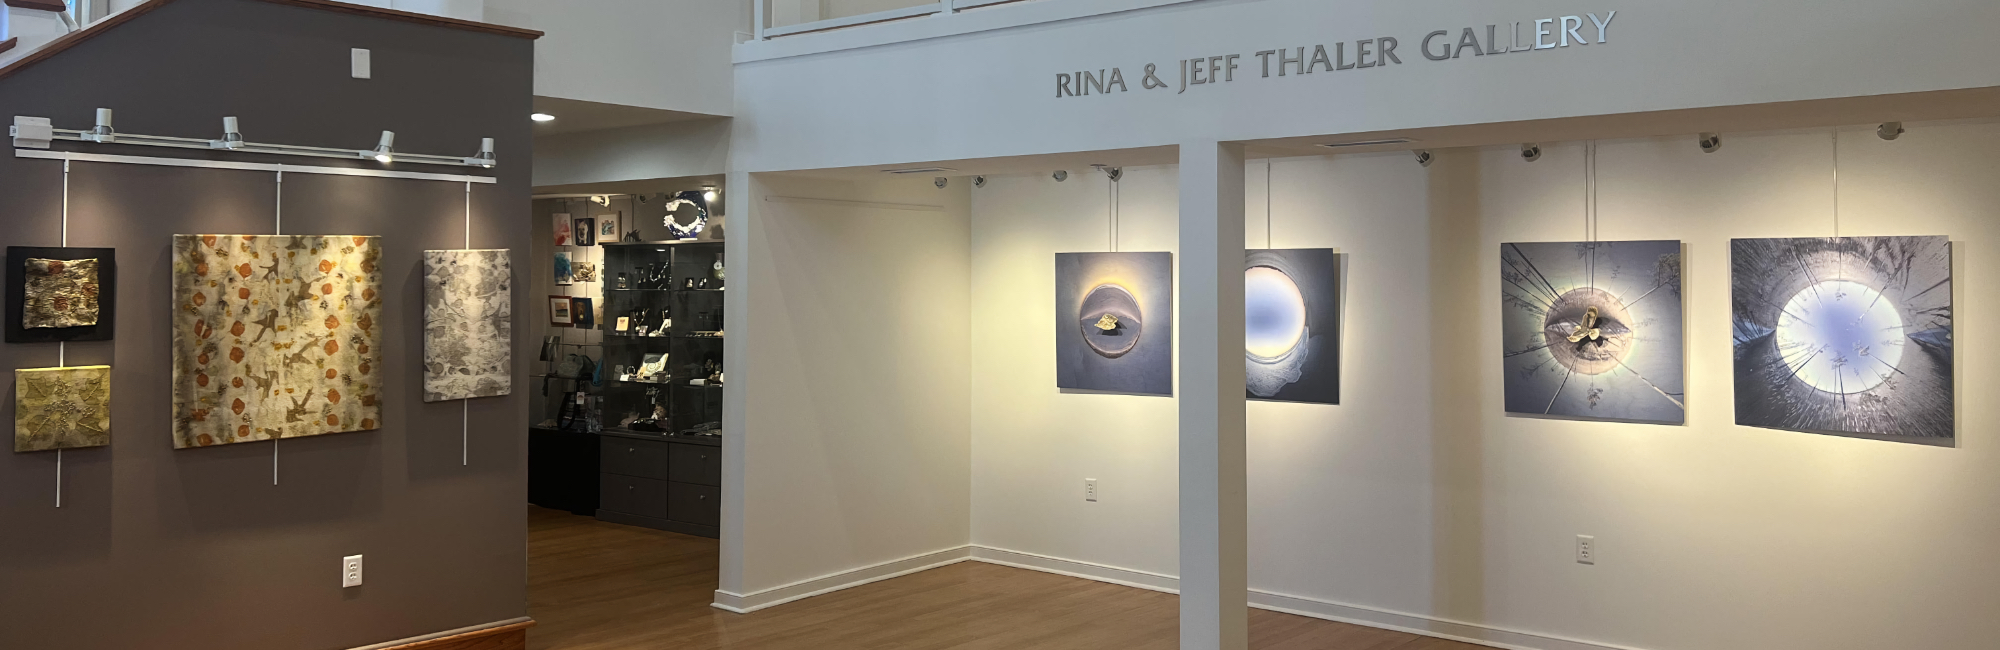 Featured in the Thaler Gallery / "Women in the Arts: Nature, Nurture, Change" featuring: Jeri Alexander, Sue Bromm, and Lisa Tossey